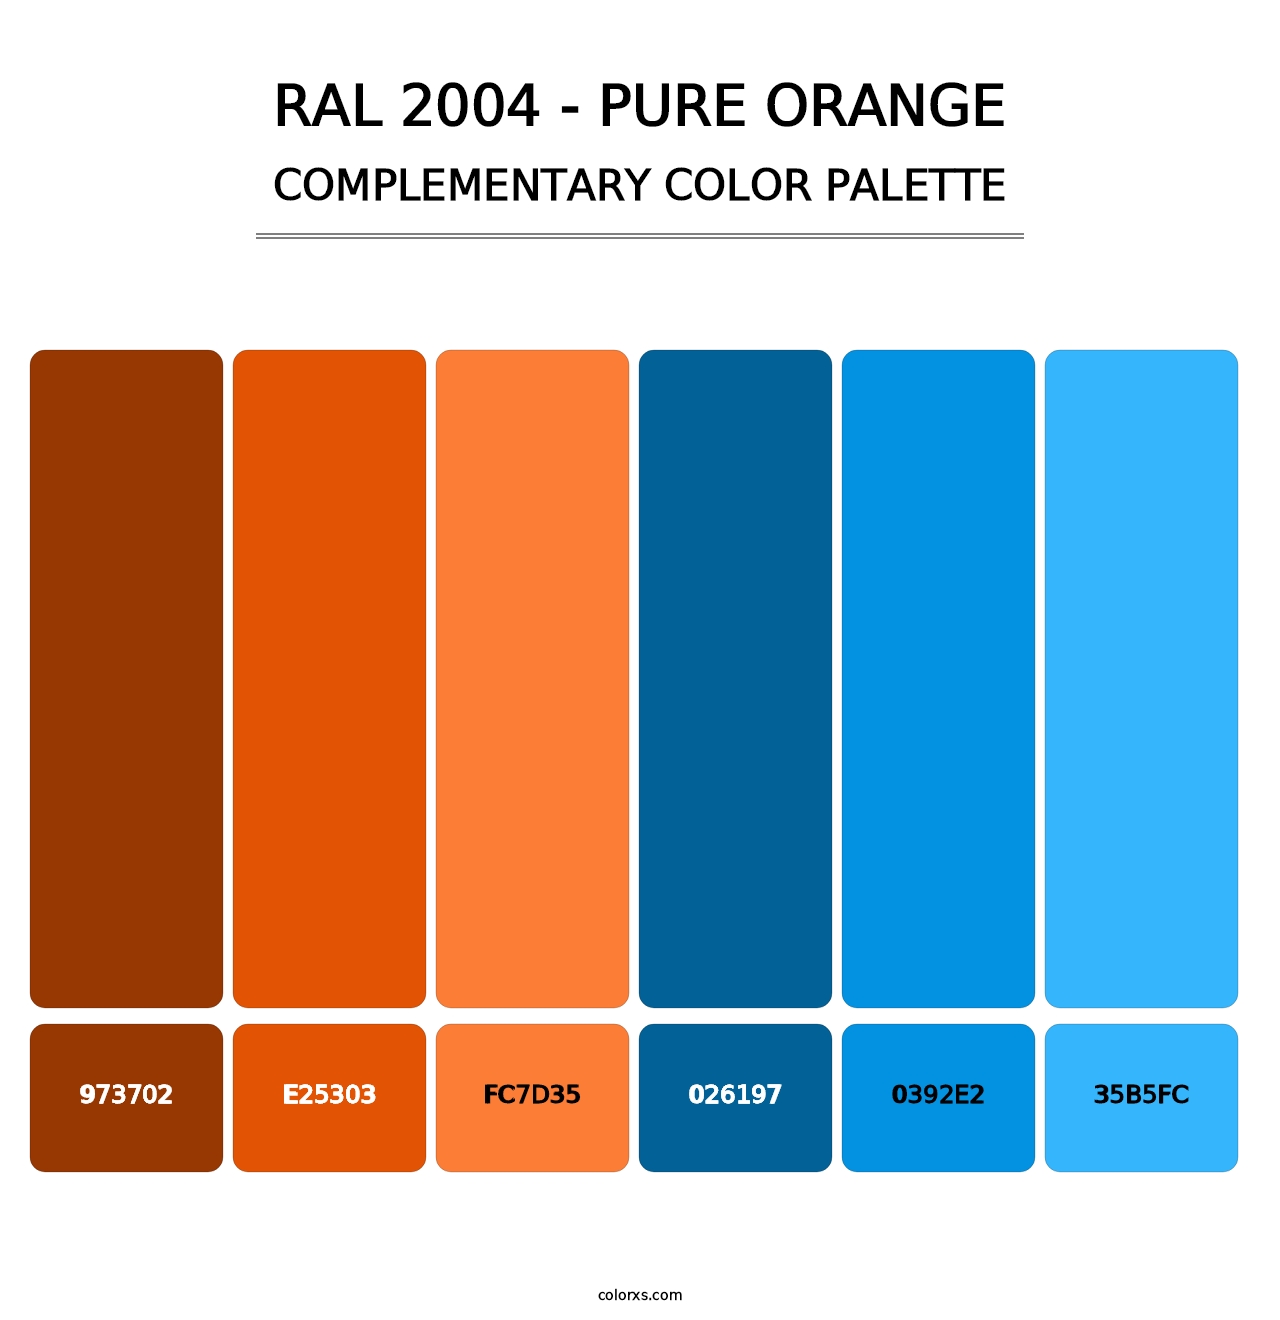 RAL 2004 - Pure Orange - Complementary Color Palette